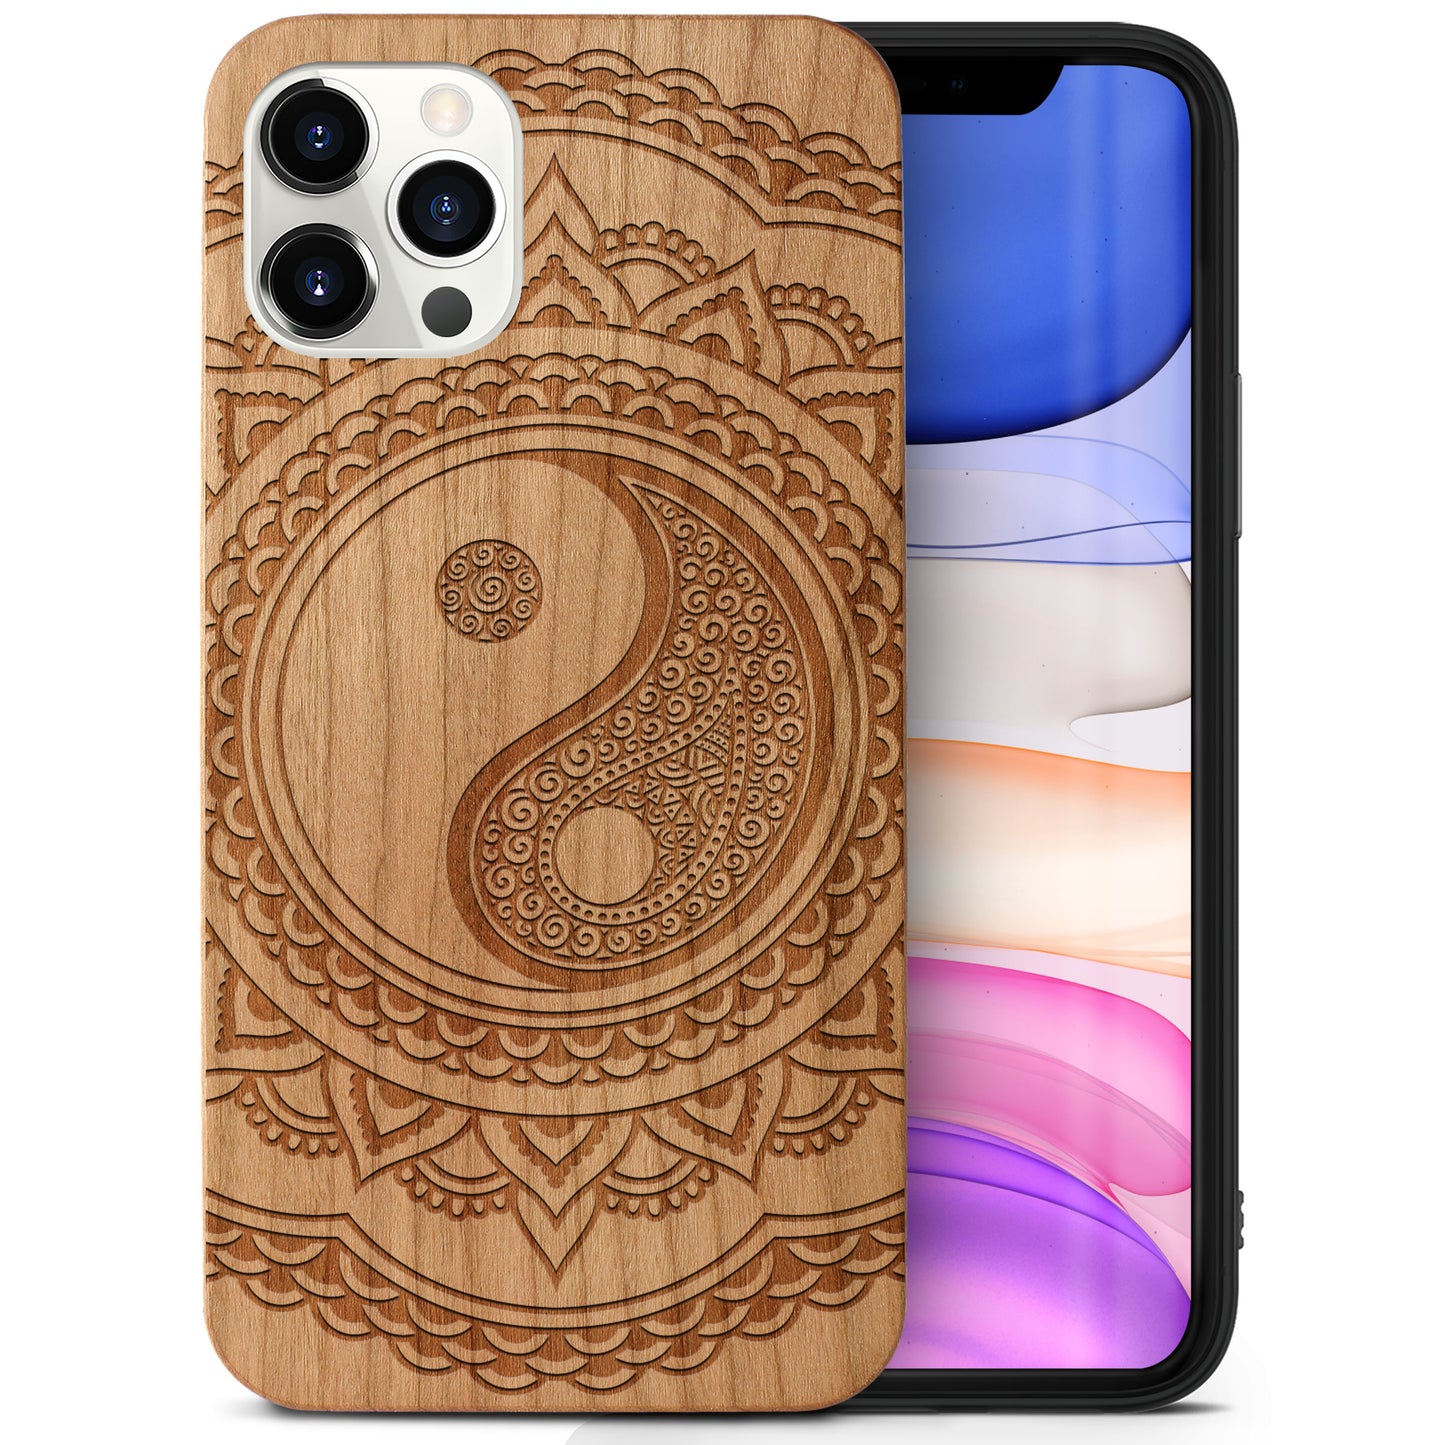 Wooden Cell Phone Case Cover, Laser Engraved case for iPhone & Samsung phone Ying Yang Mandala 2 Design